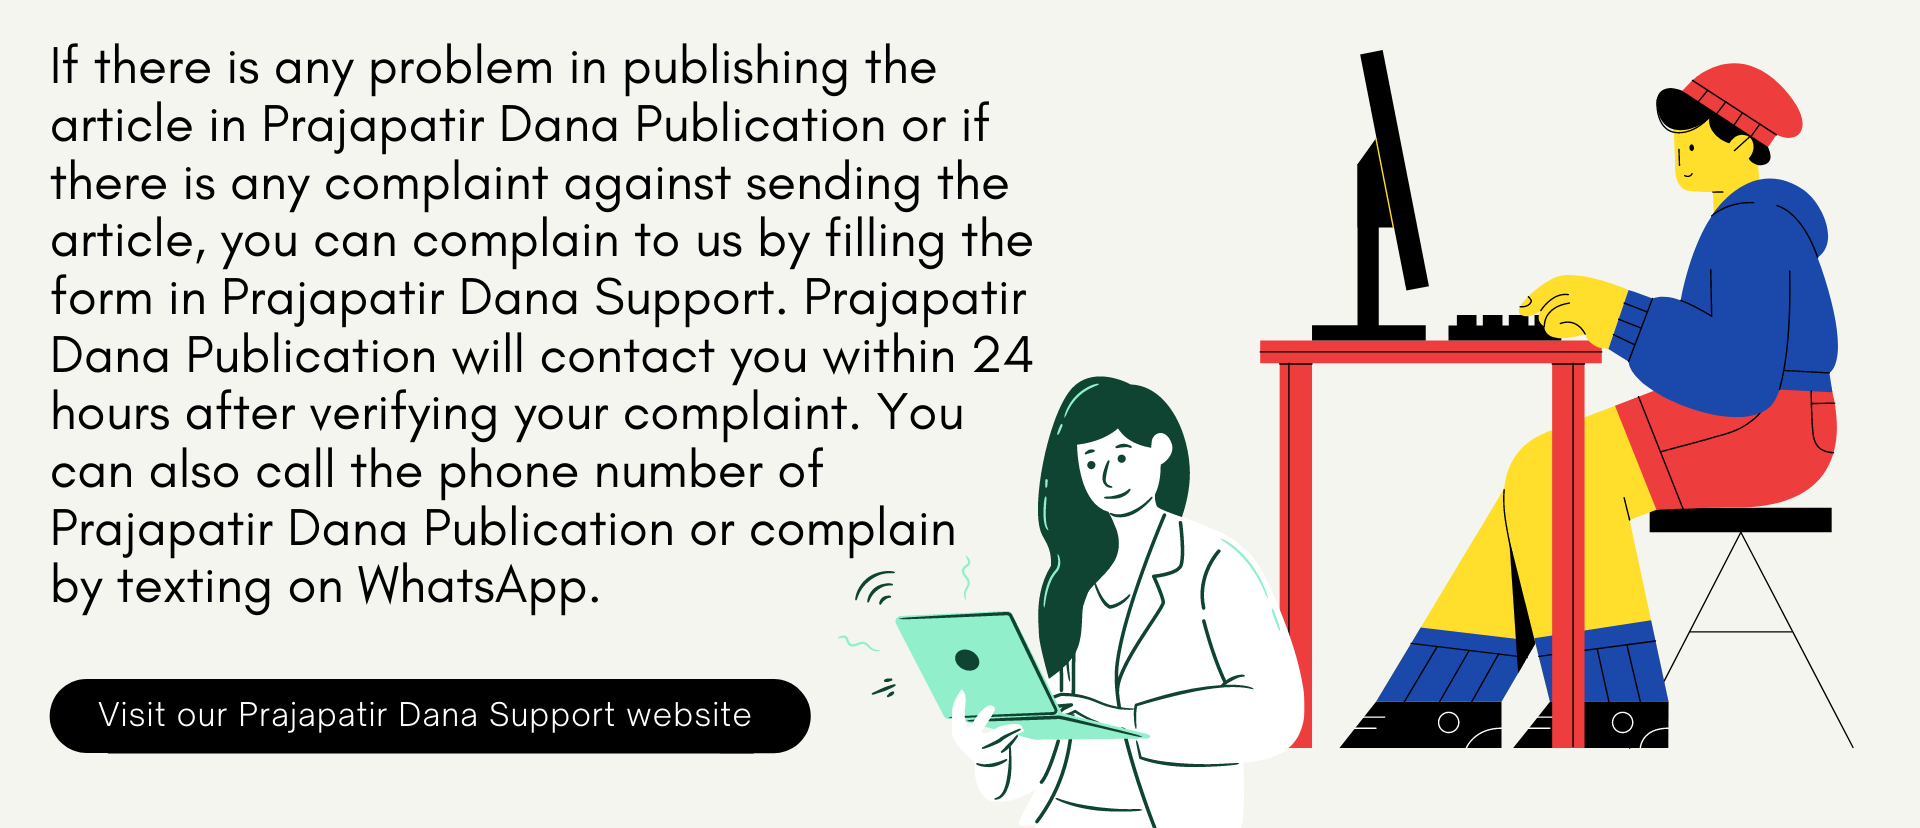 Visit our Projapotir Dana Support website and send us your complaint.